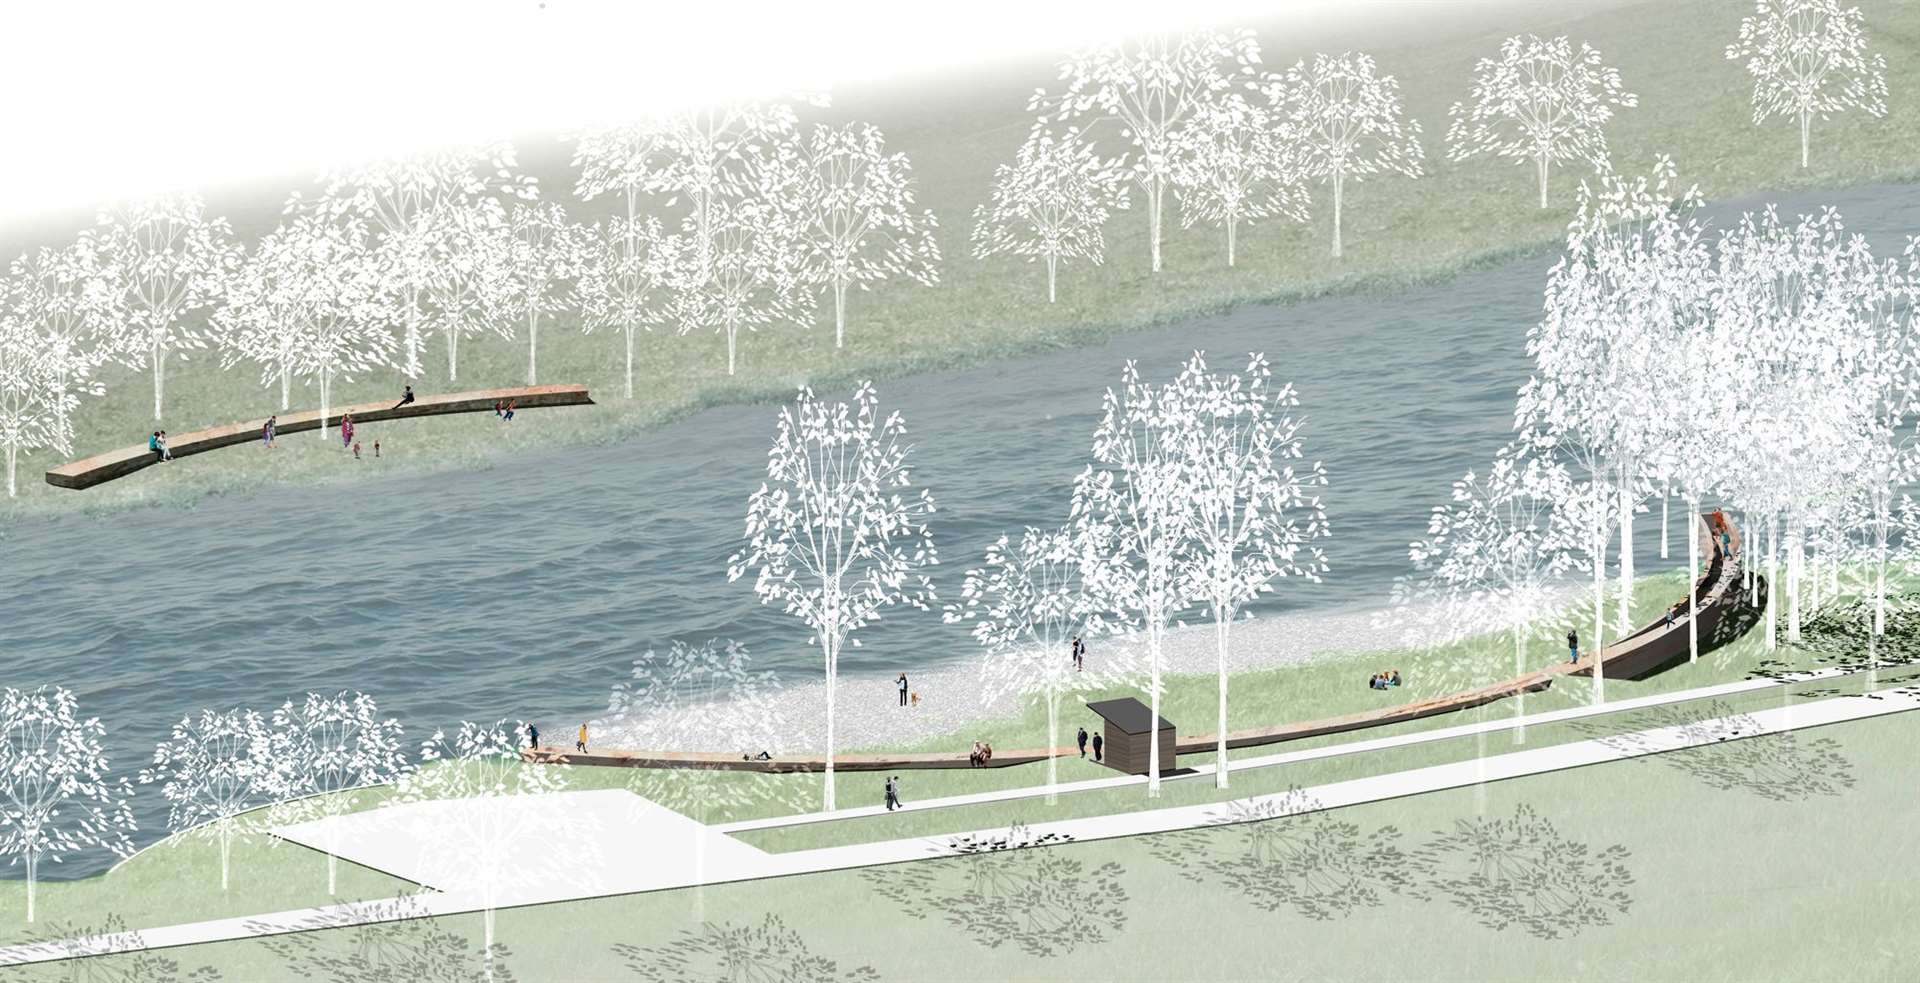 An artist's impression of planned river artwork called My Ness.